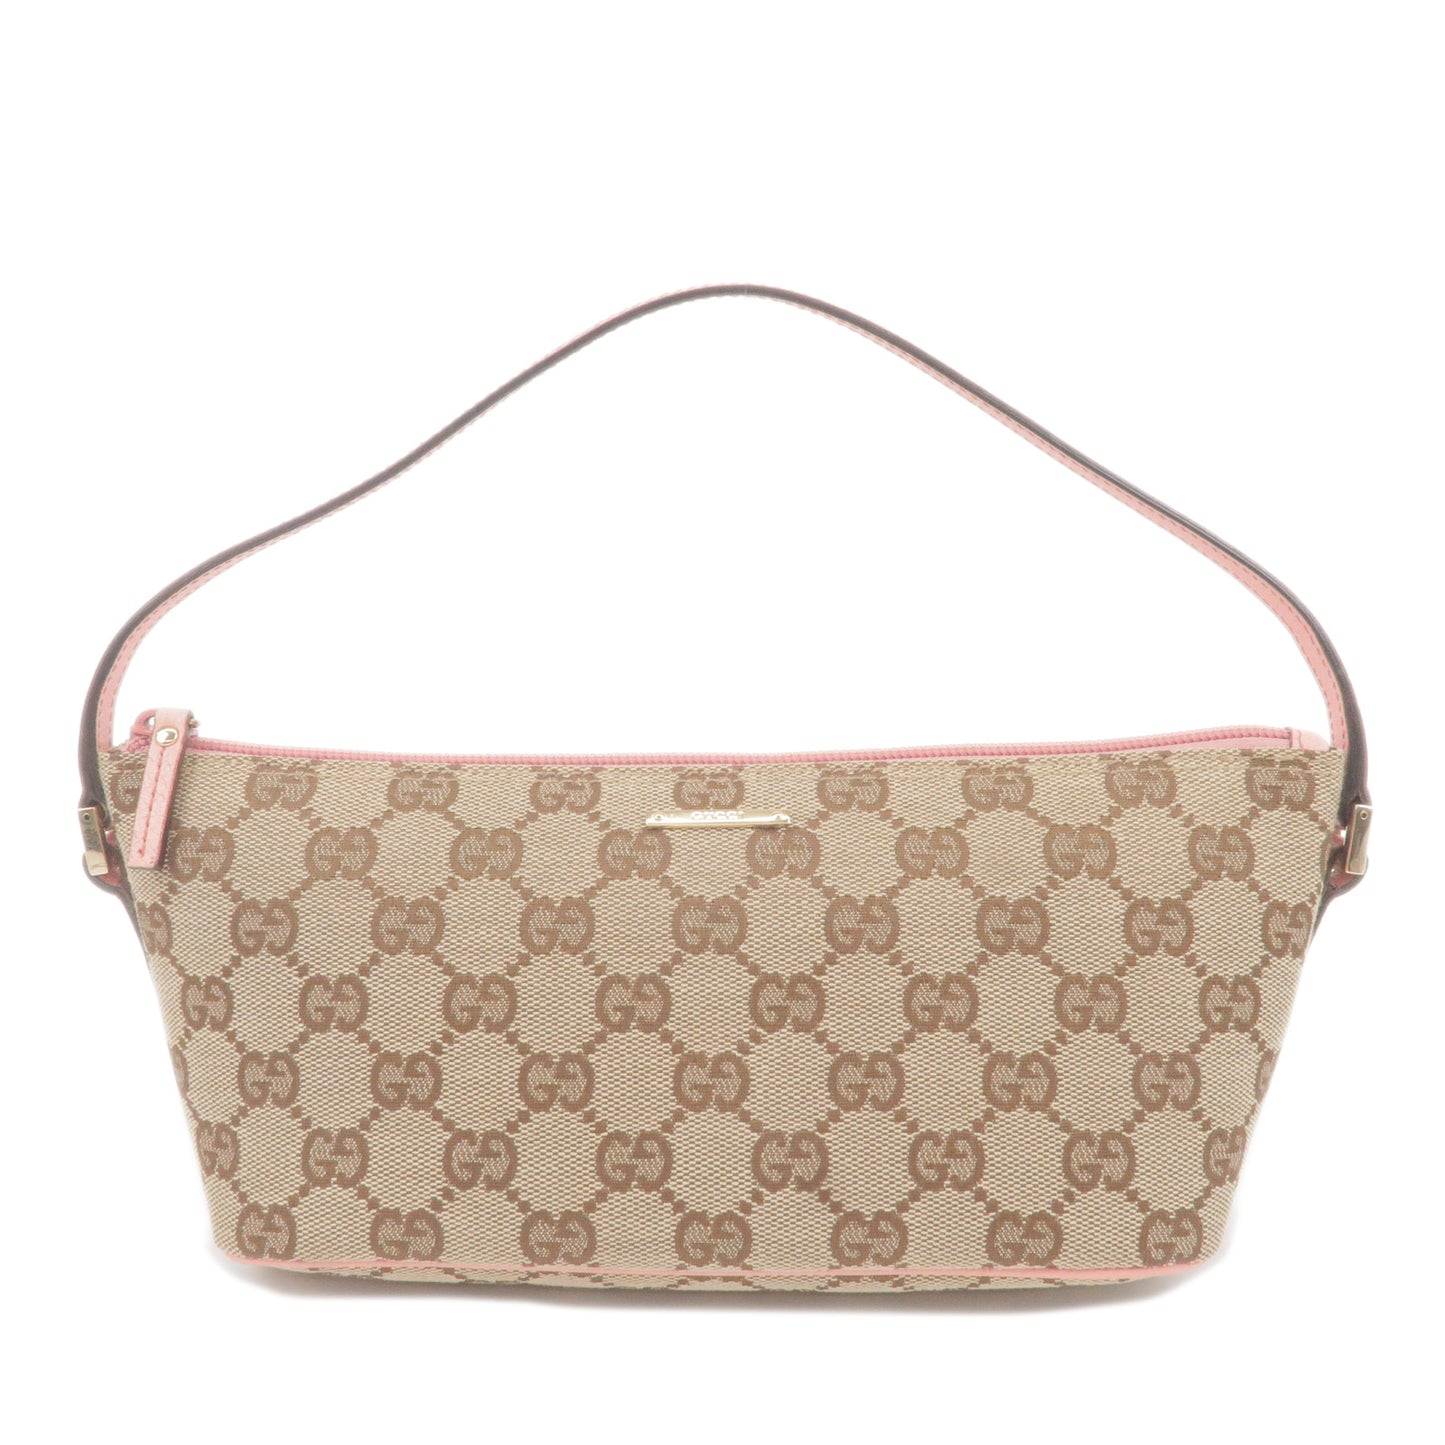 GUCCI-GG-Canvas-Leather-Boat-Bag-Hand-Bag-Beige-Pink-07198